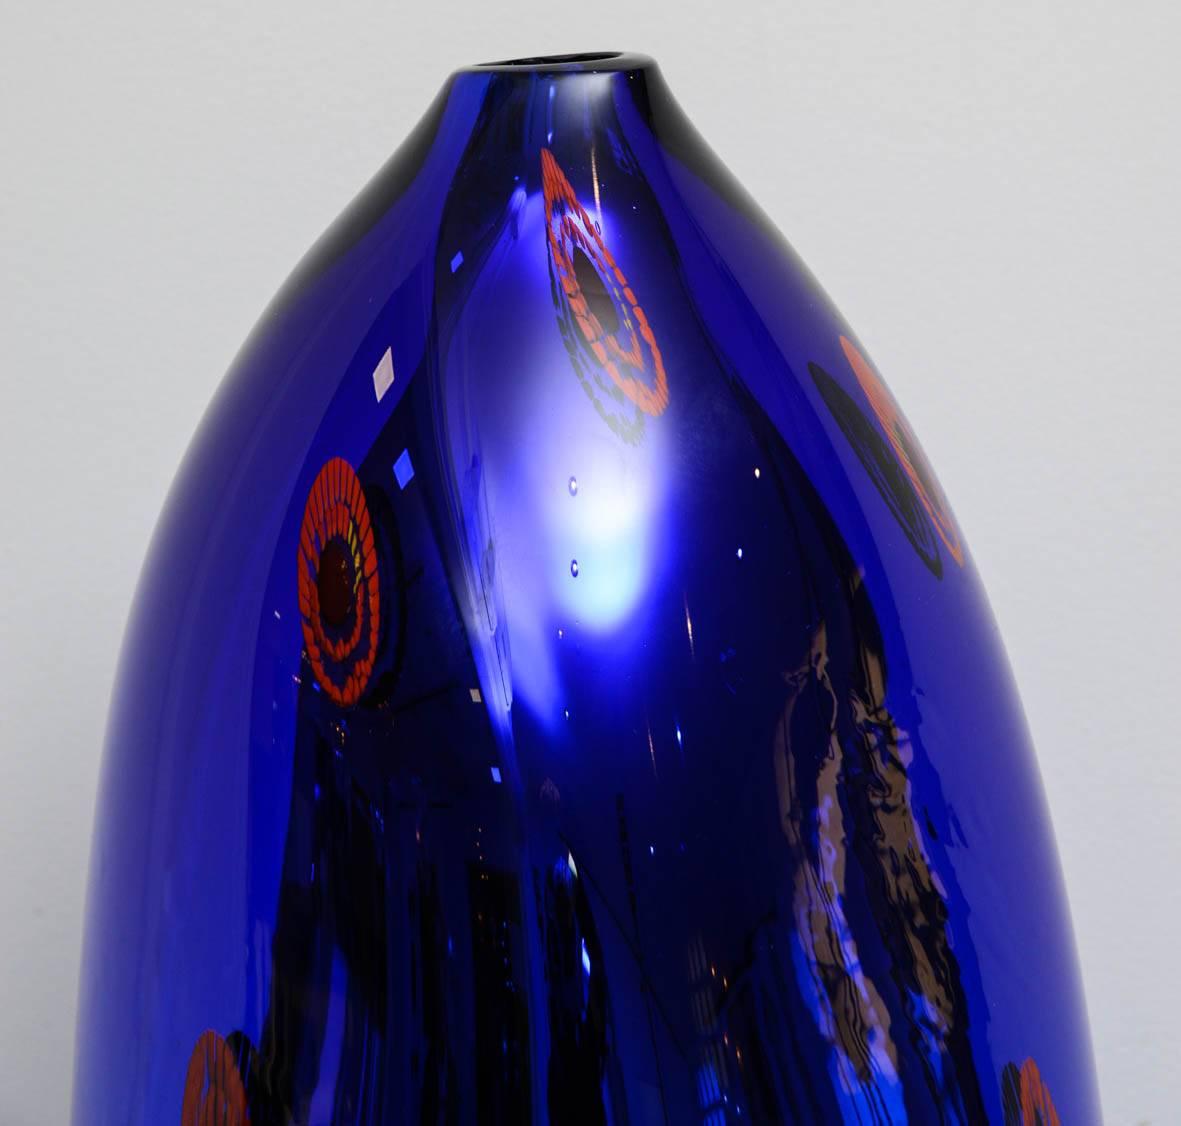 The vase is signed, one-off, in perfect condition, blue Murano glass, free-form, with red murrines inclusions.